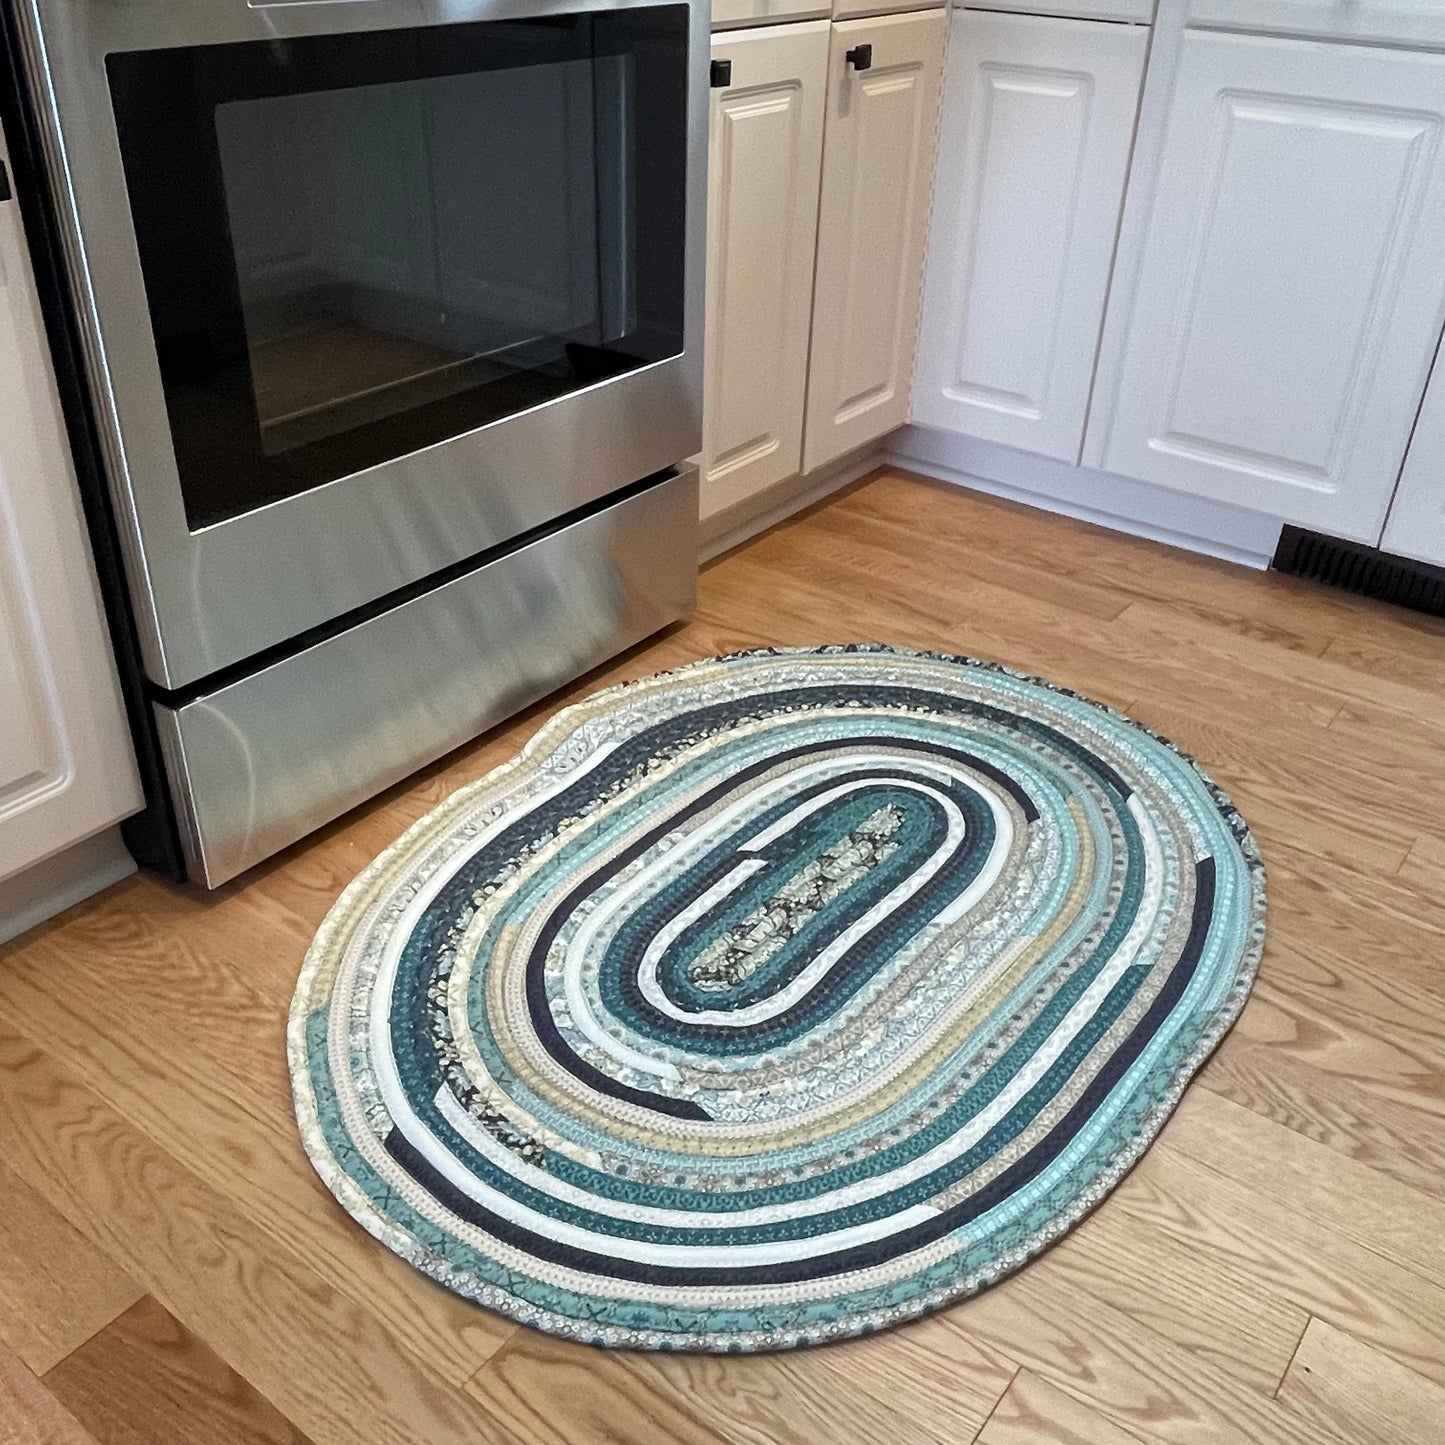 Green Handmade Kitchen Accent Rug For Bathroom or Bedside Too!